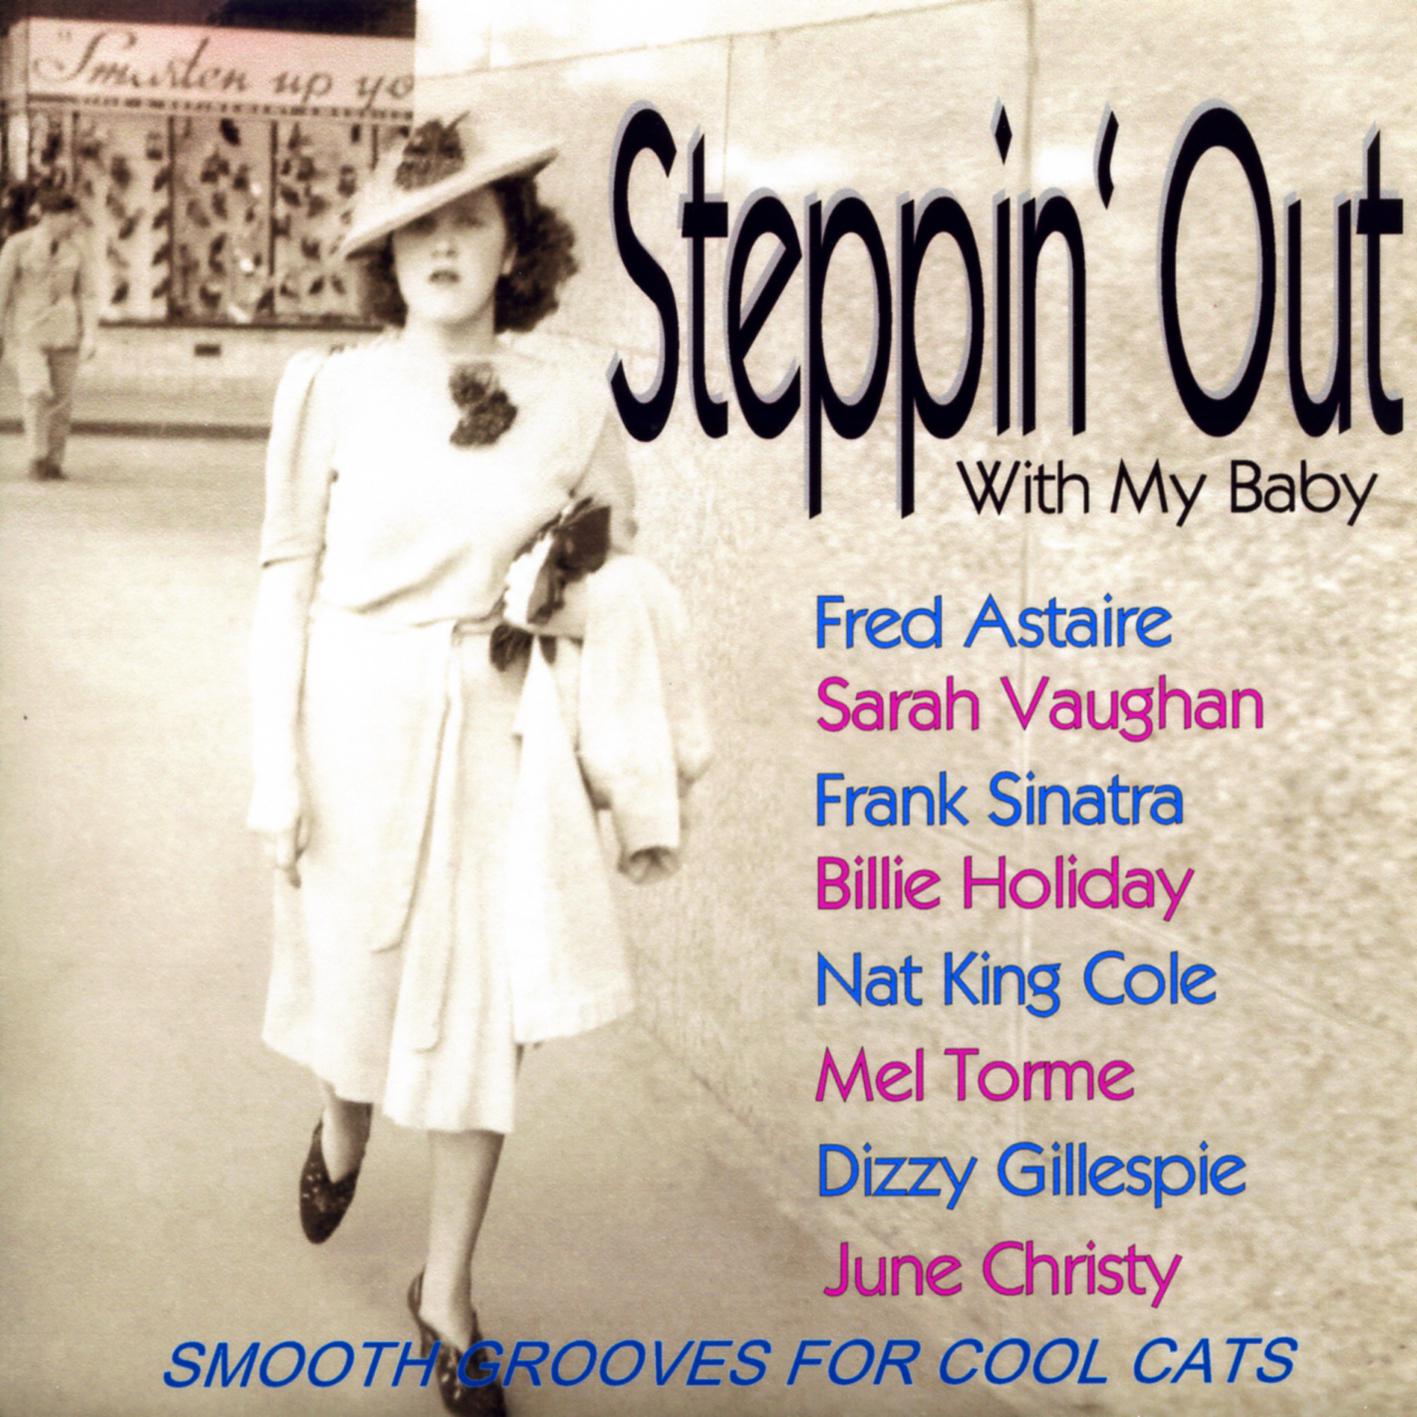 Steppin' Out With By Baby